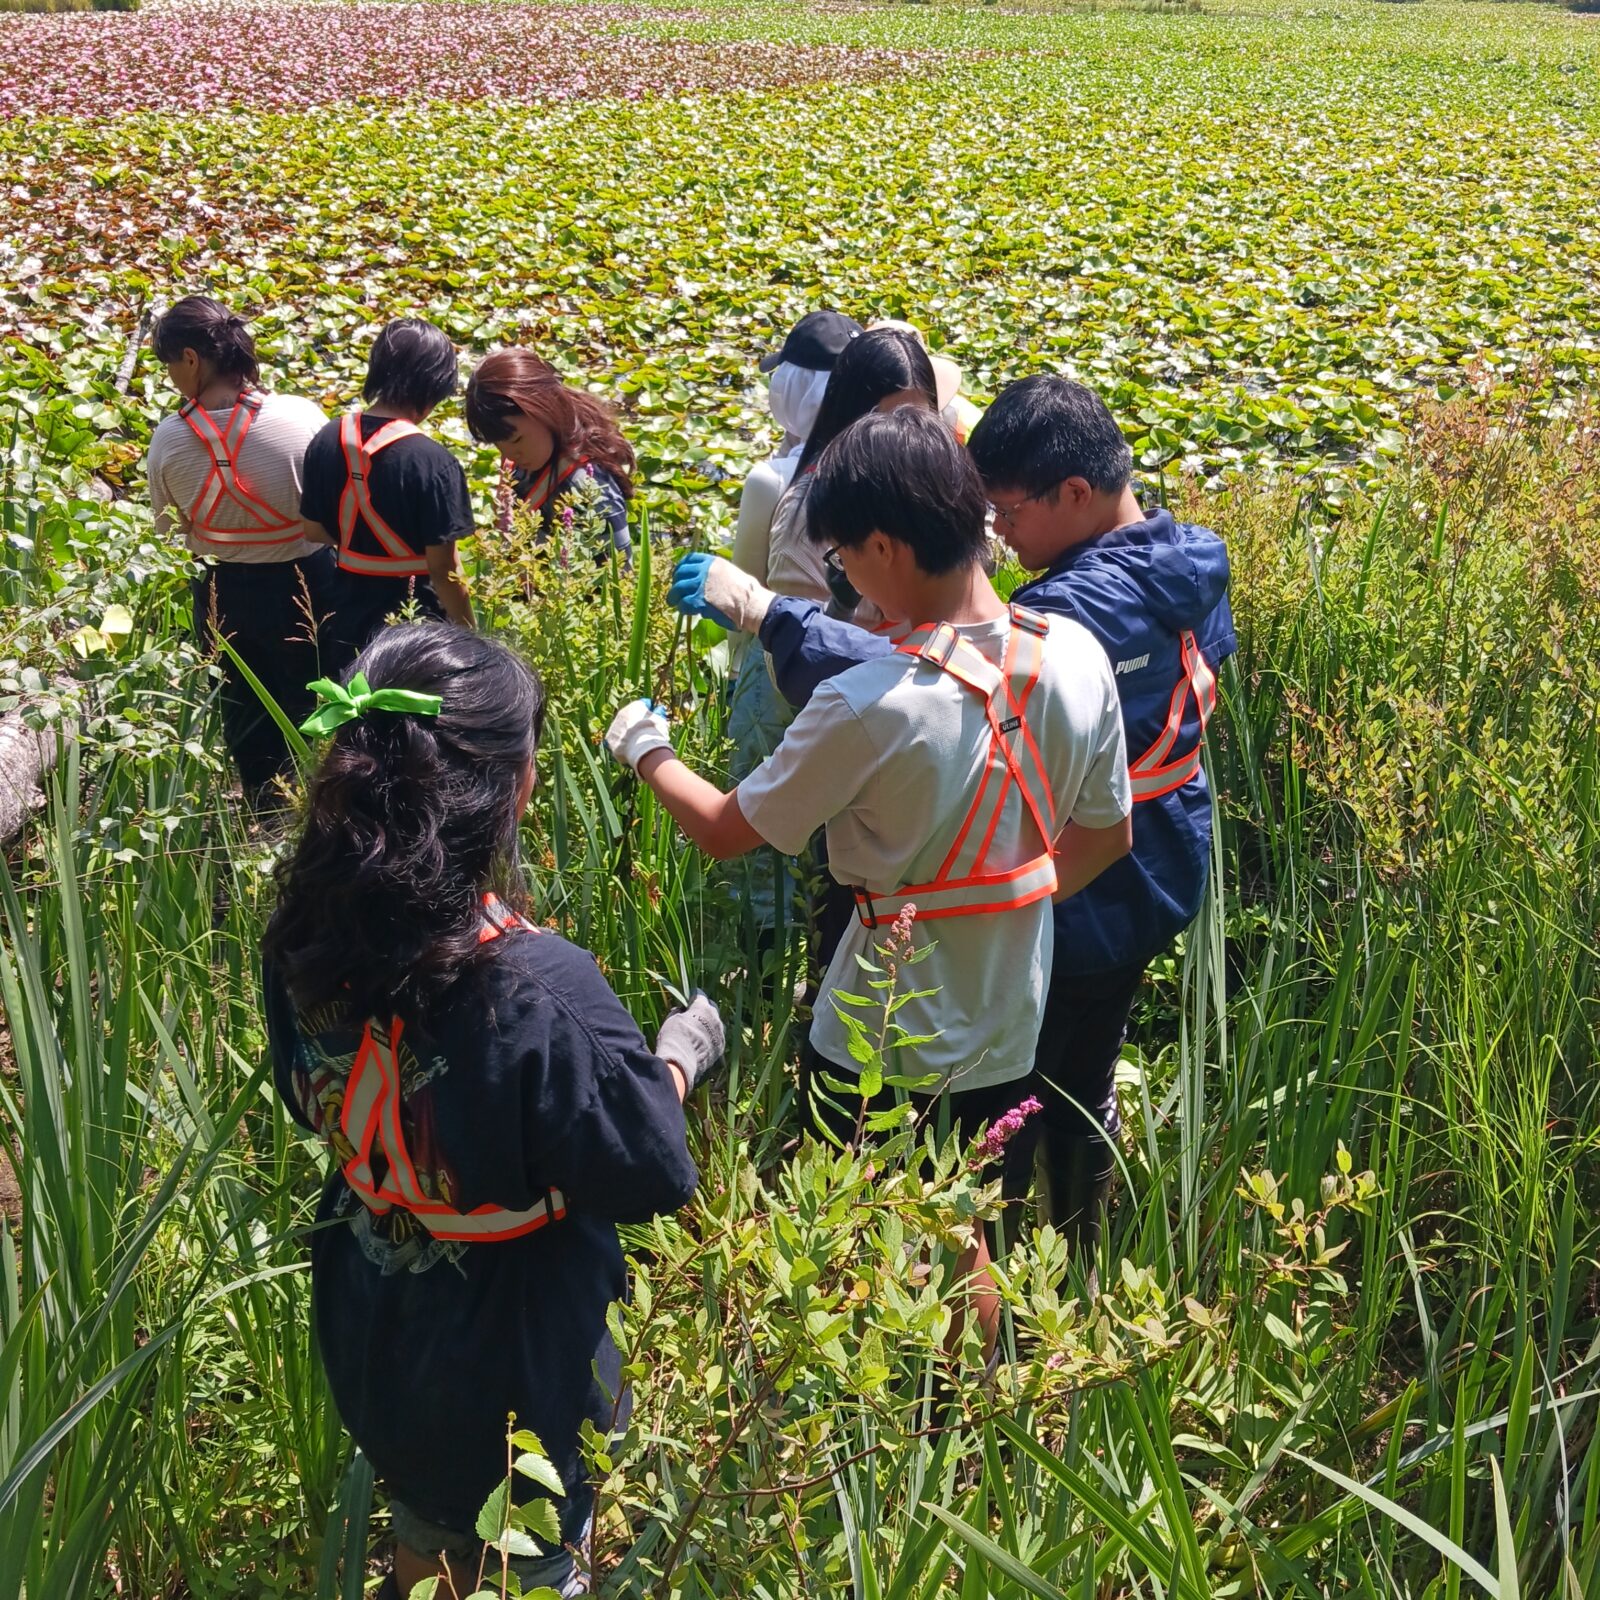 Photo of EYA youth participants gardening in a field.